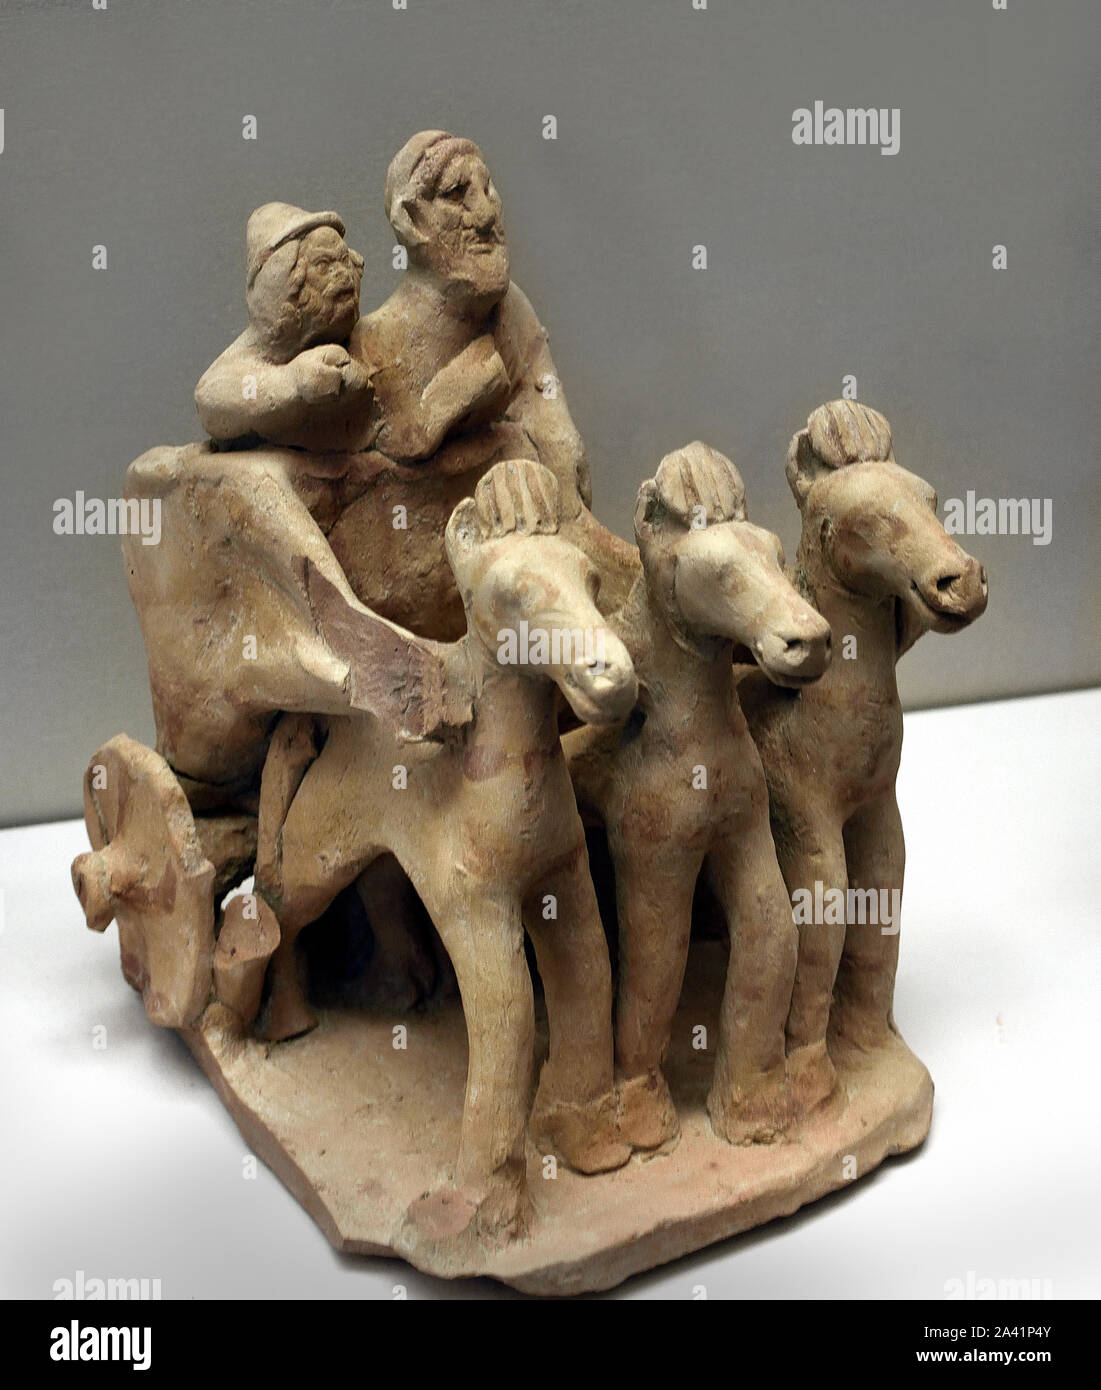 Warriors on a chariot 8th - 5th Century BC ( Cypro-Archaic and Cypro-Classical periods (c. 750–300 BC)  8th - 5th century BC is characterized by instability due to frequent foreign intervention and domination of Cyprus.) Stock Photo